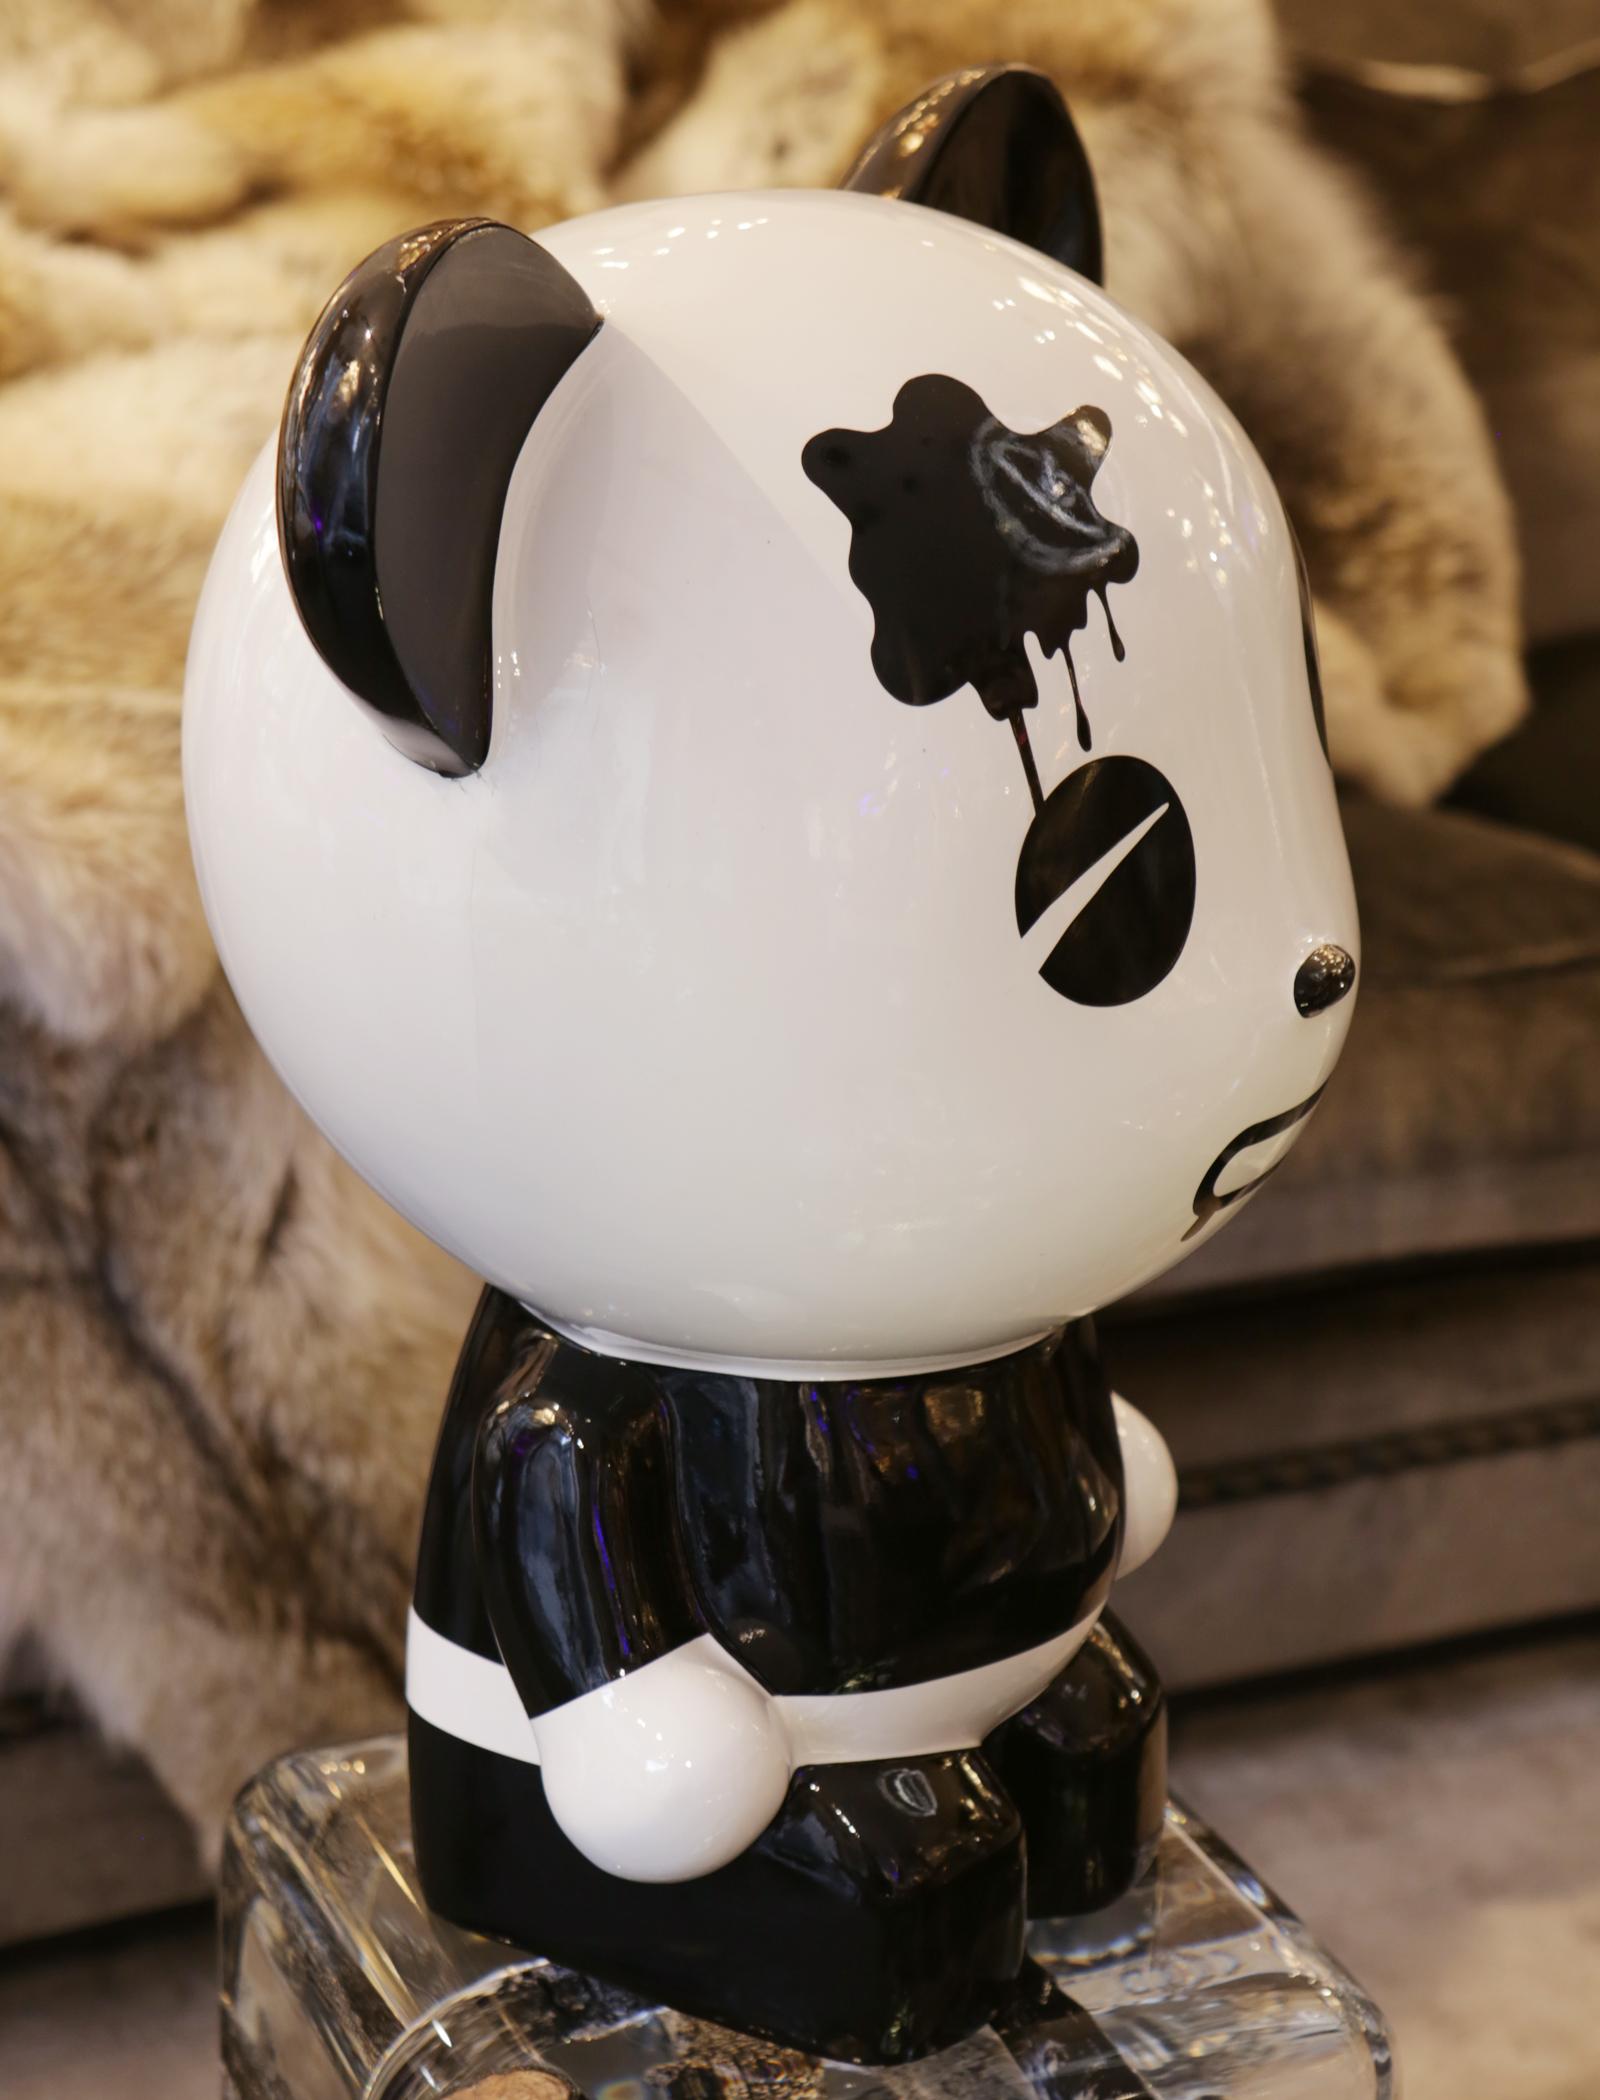 Lacquered Wounded Panda Sculpture by Jiji